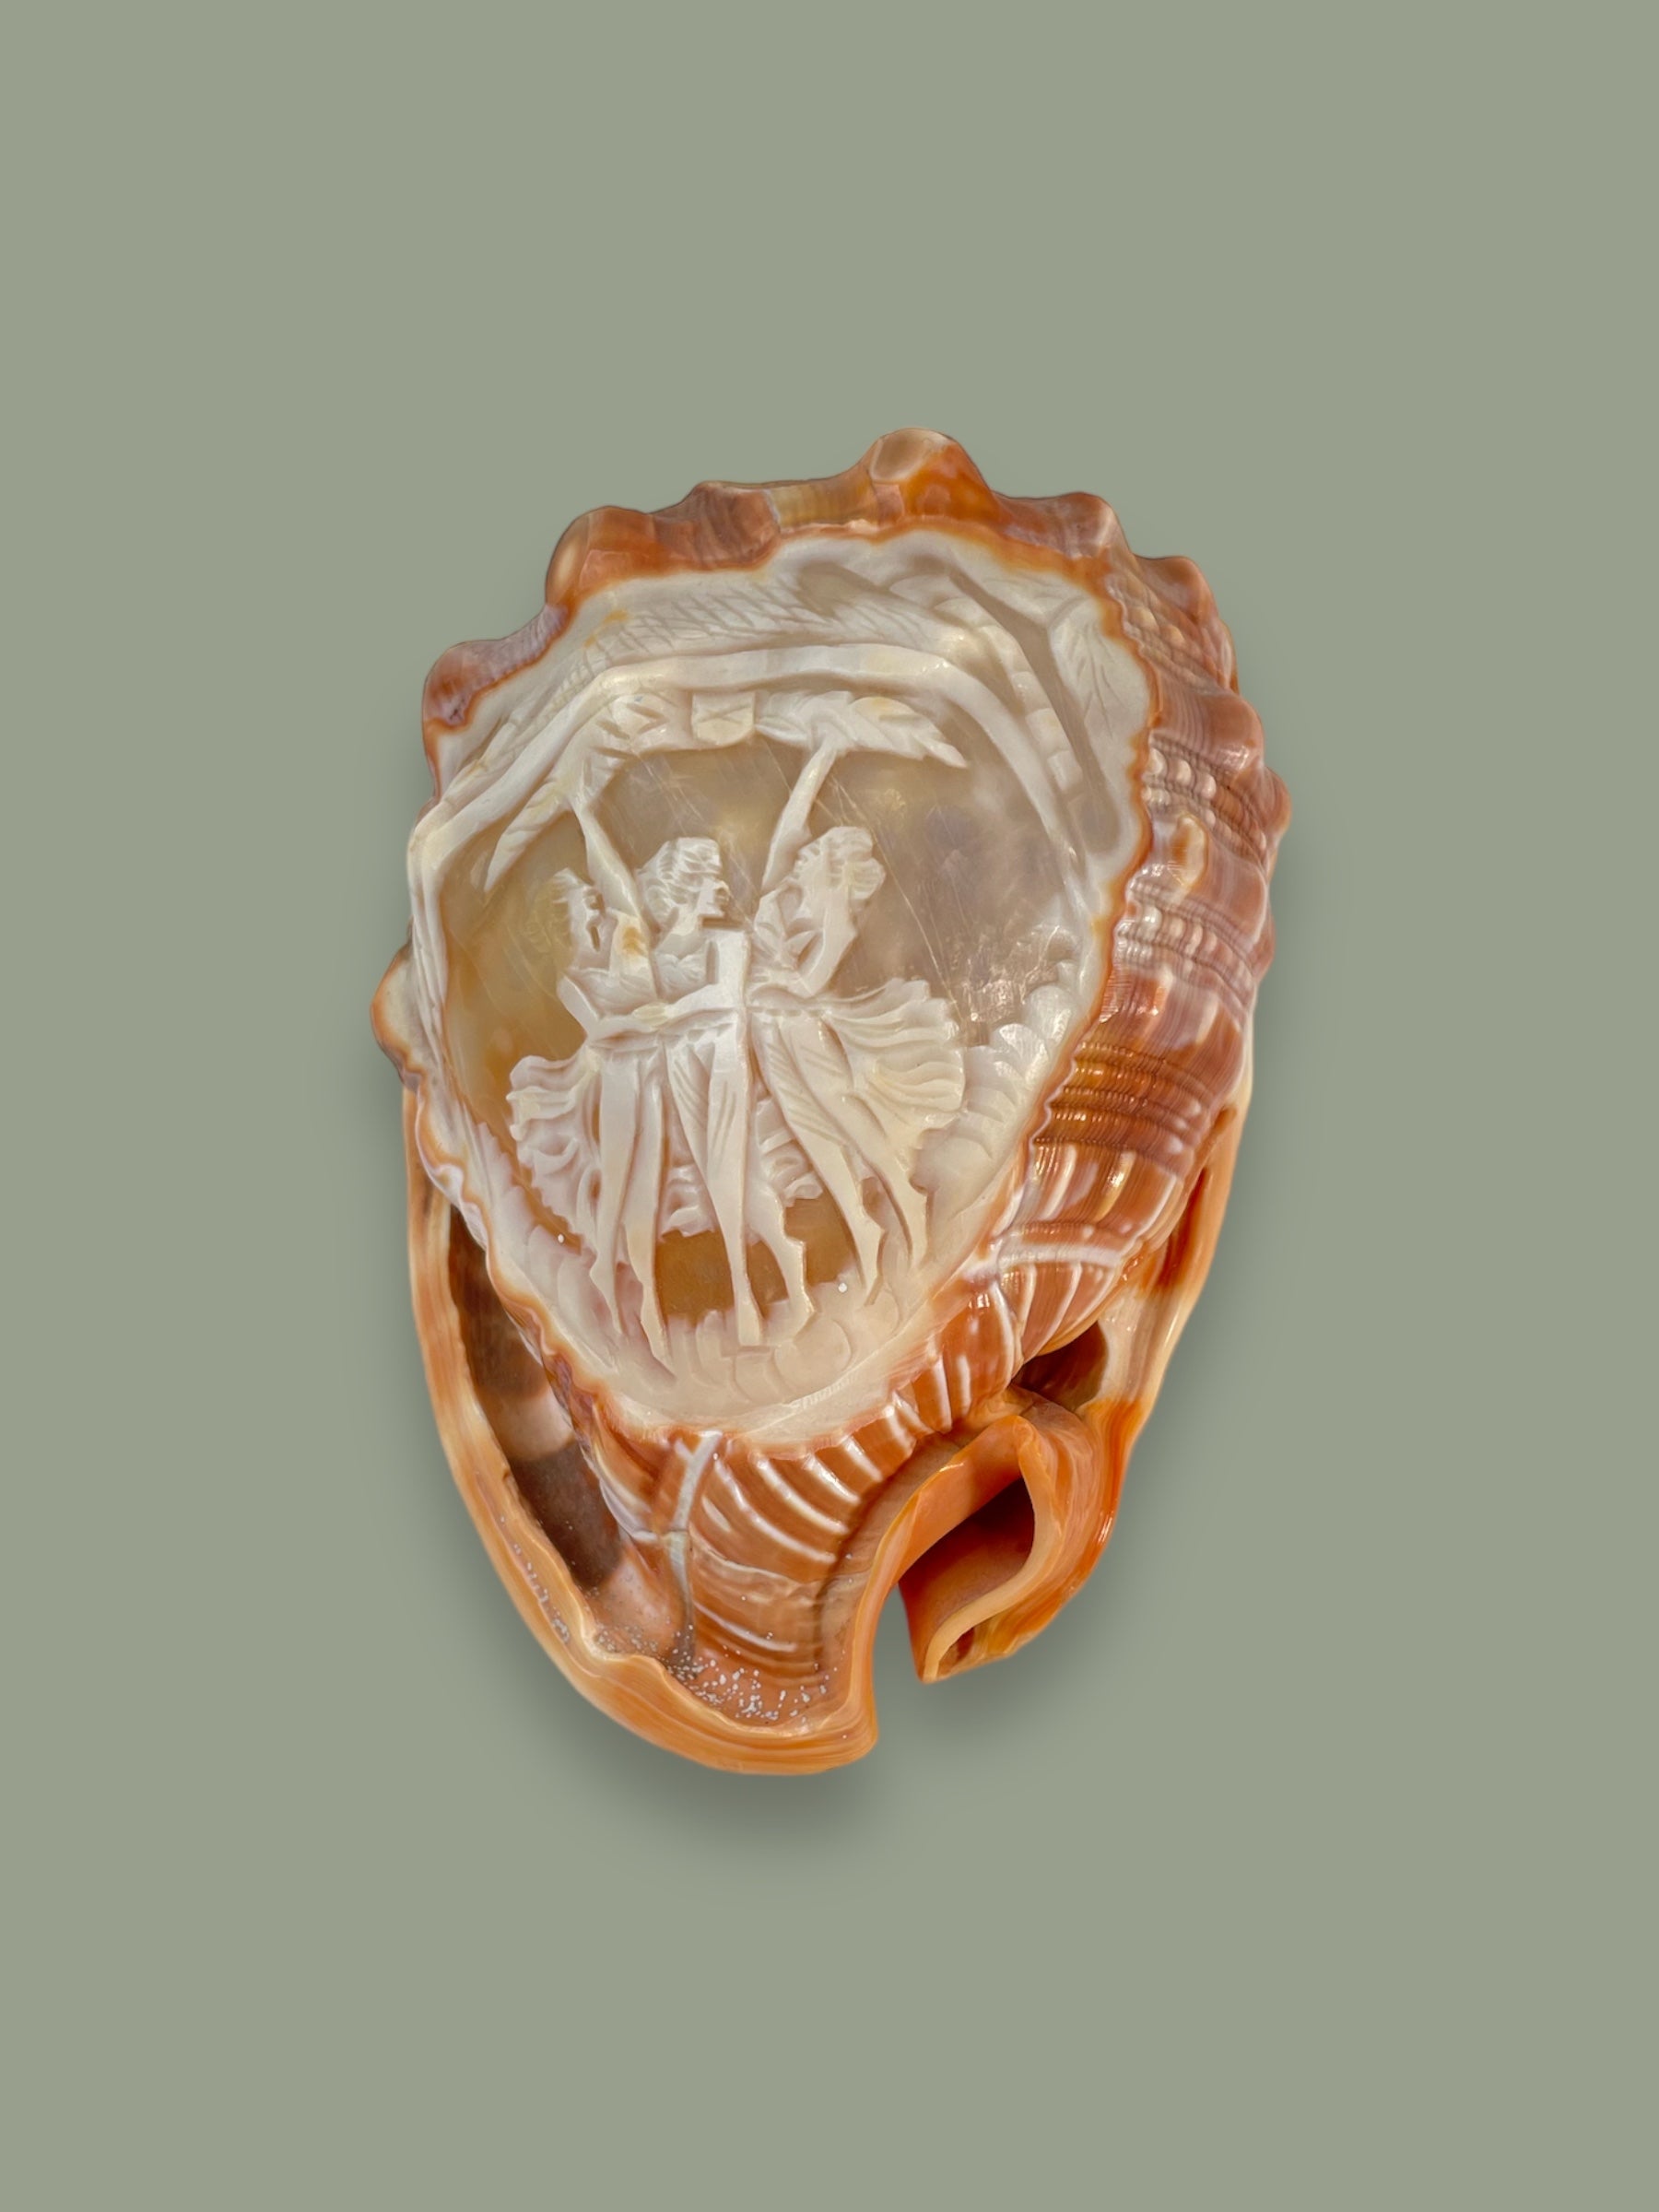 Vintage Shell Sculpted in Cameo from the 19th century